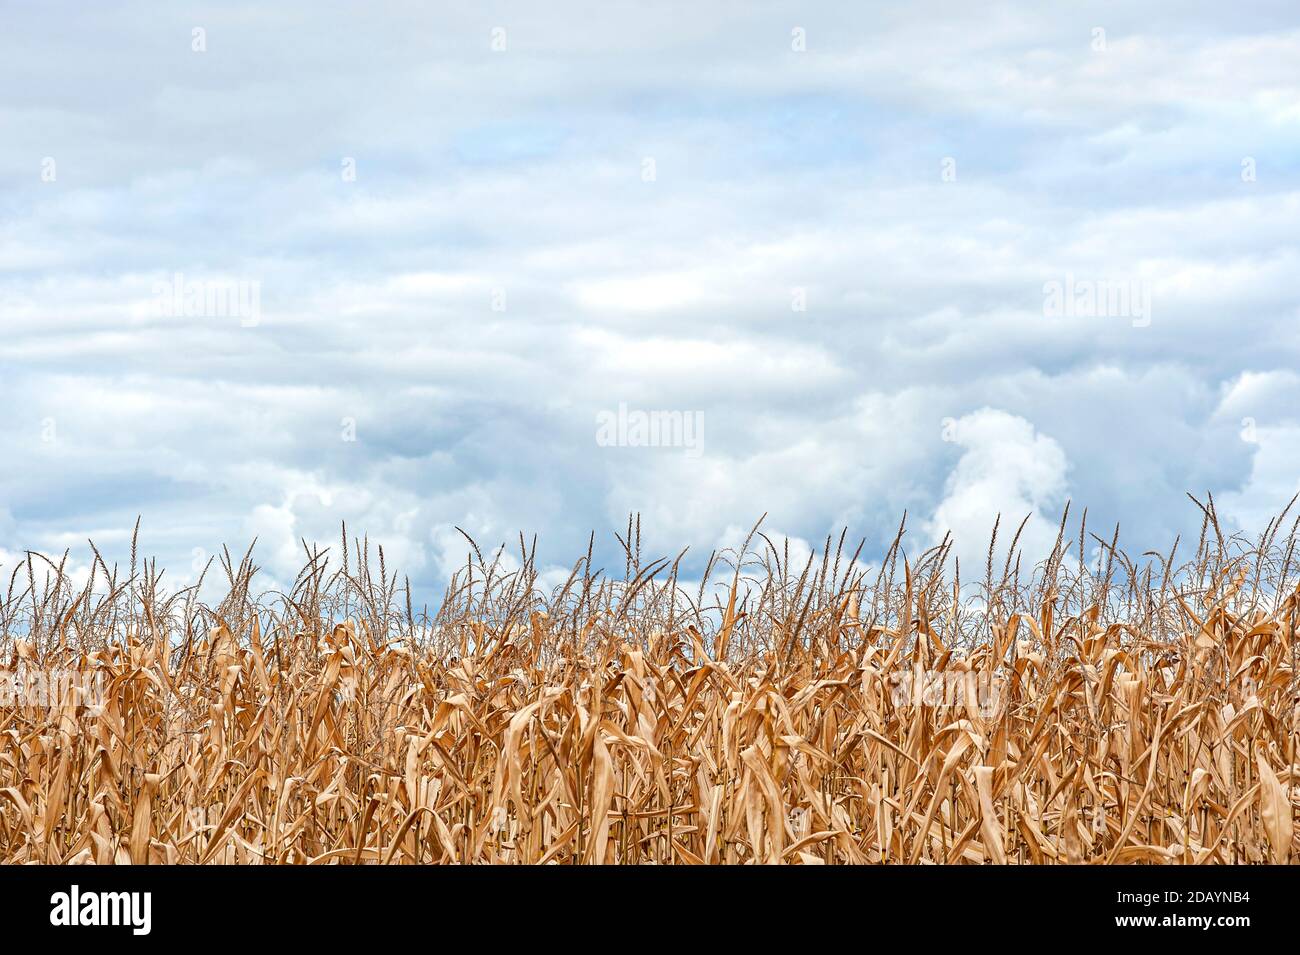 weathered corn stalks against cloudy sky. Stock Photo